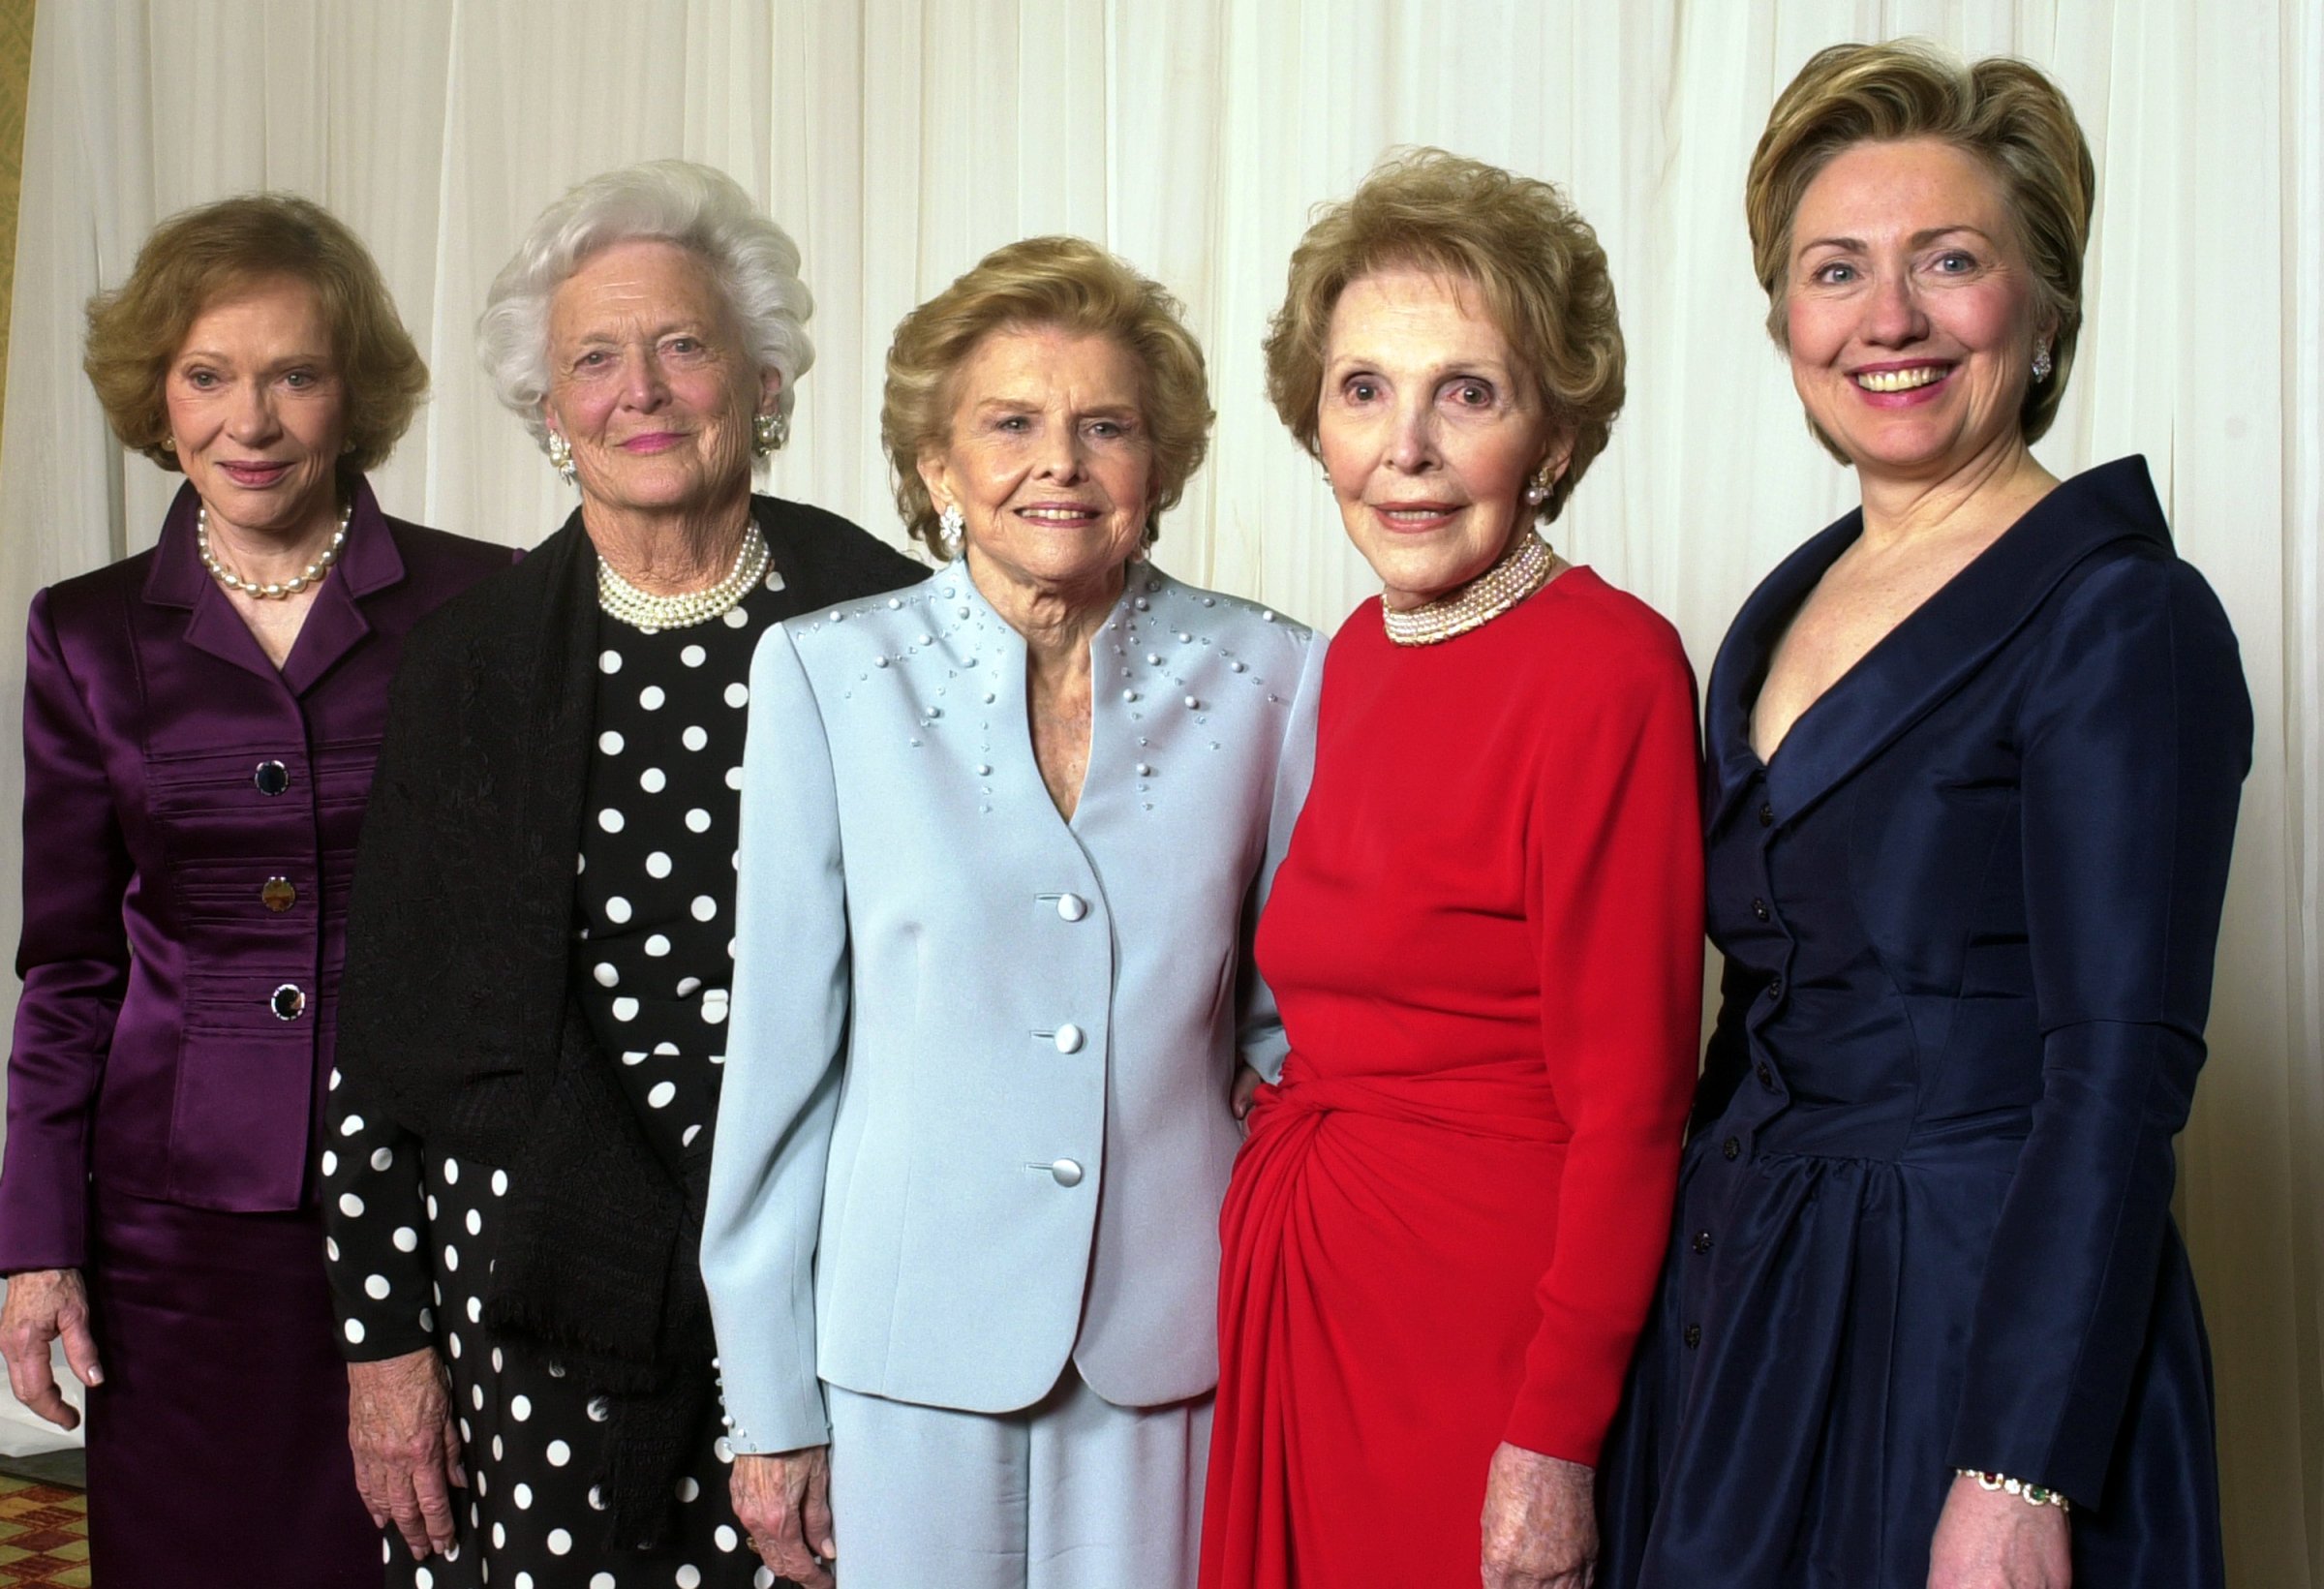 Former first ladies get together for a group photo at a gala 20th anniversary fundraising event saluting Betty Ford and the Betty Ford Center in Indian Wells, Calif. on Jan. 17, 2003. From left are Rosalynn Carter, Barbara Bush, Betty Ford, Nancy Reagan and Sen. Hillary Rodham Clinton.